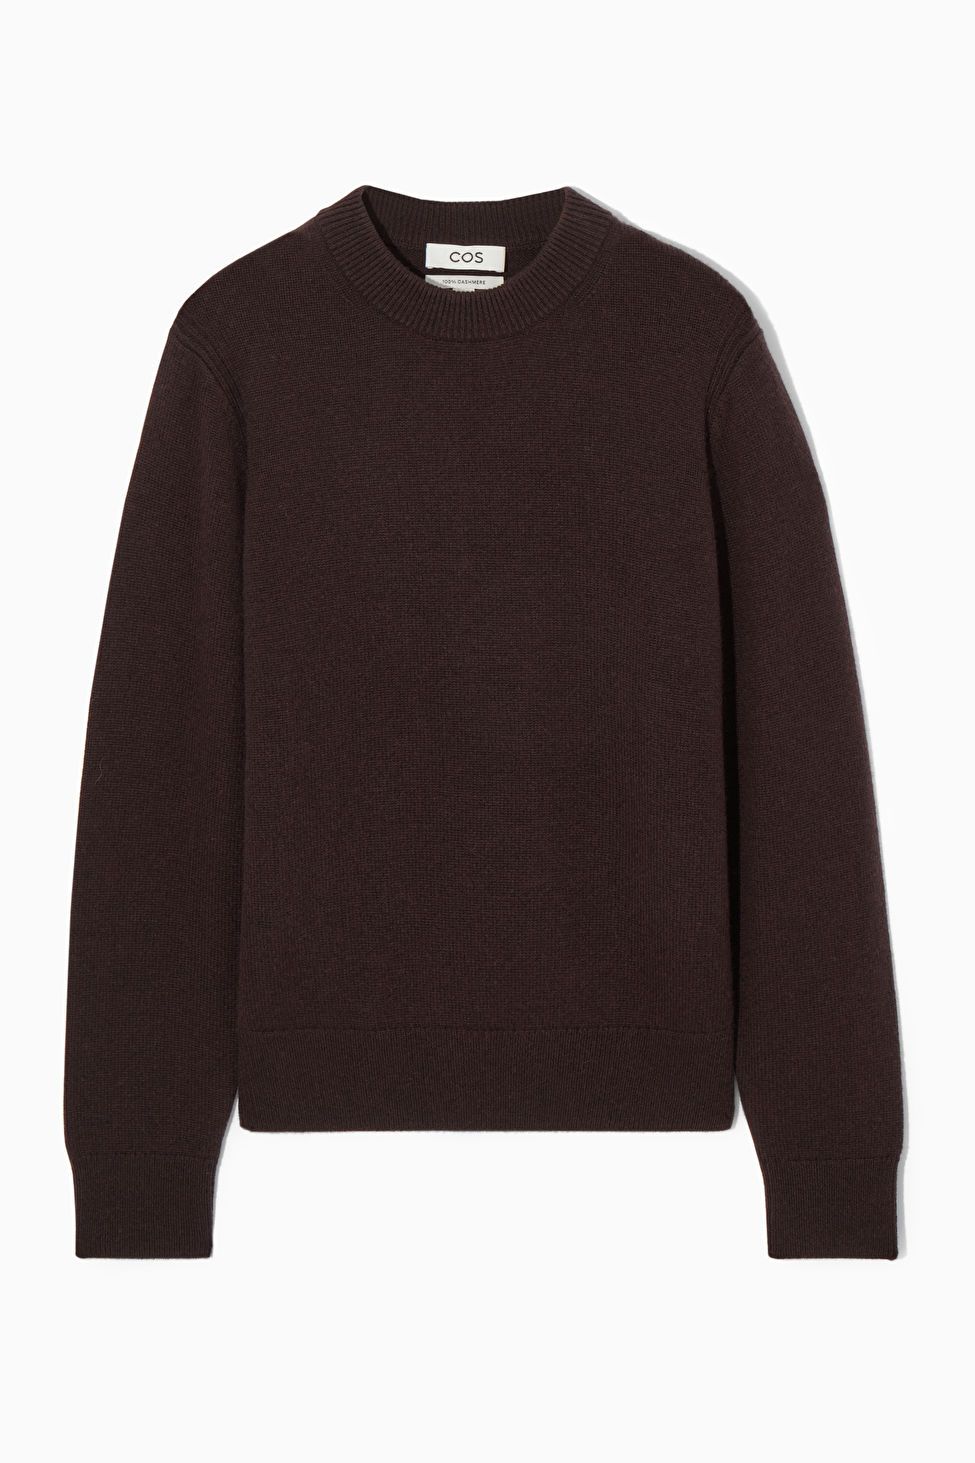 PURE CASHMERE SWEATER - DARK BROWN - Tops - COS | COS (US)